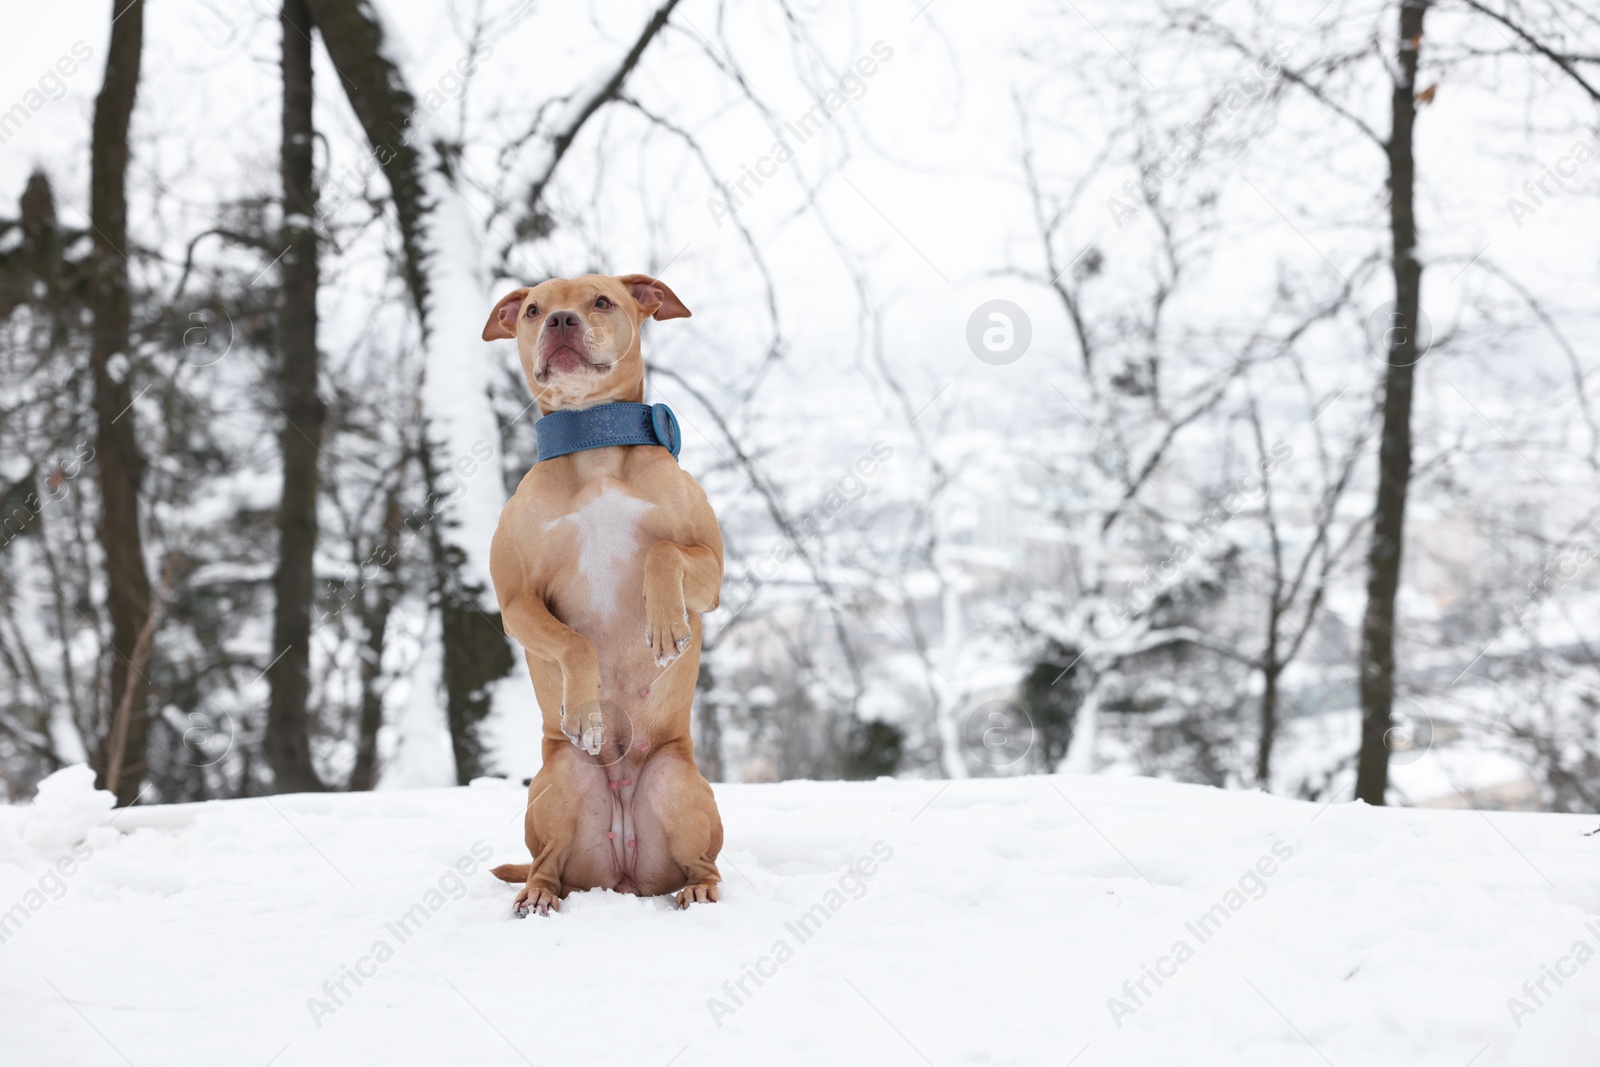 Photo of Cute ginger dog standing on hind legs in snowy forest. Space for text